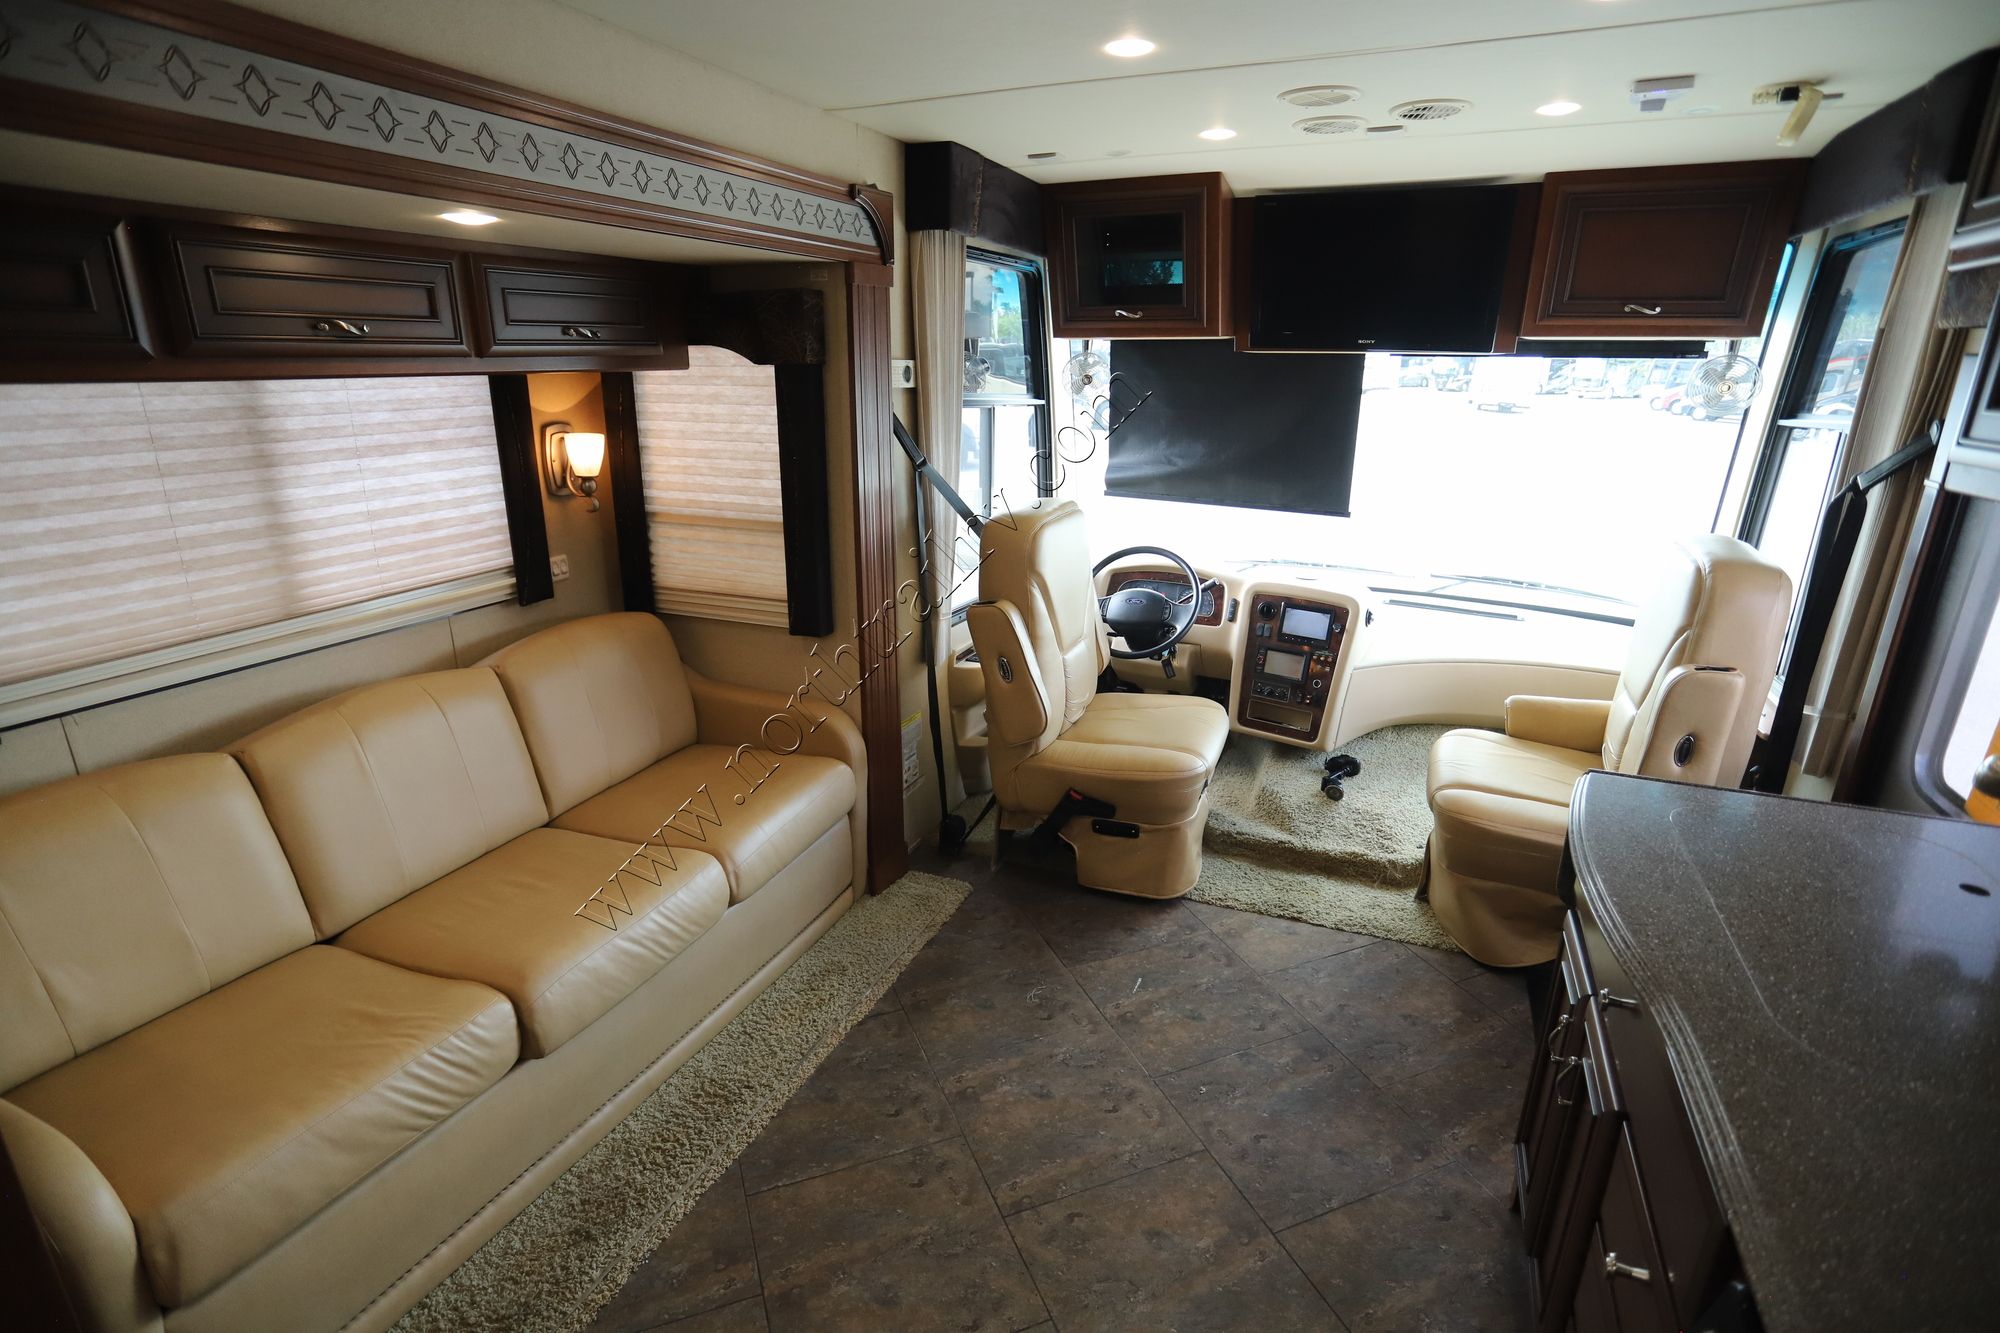 Used 2013 Newmar Canyon Star 3920 Class A  For Sale